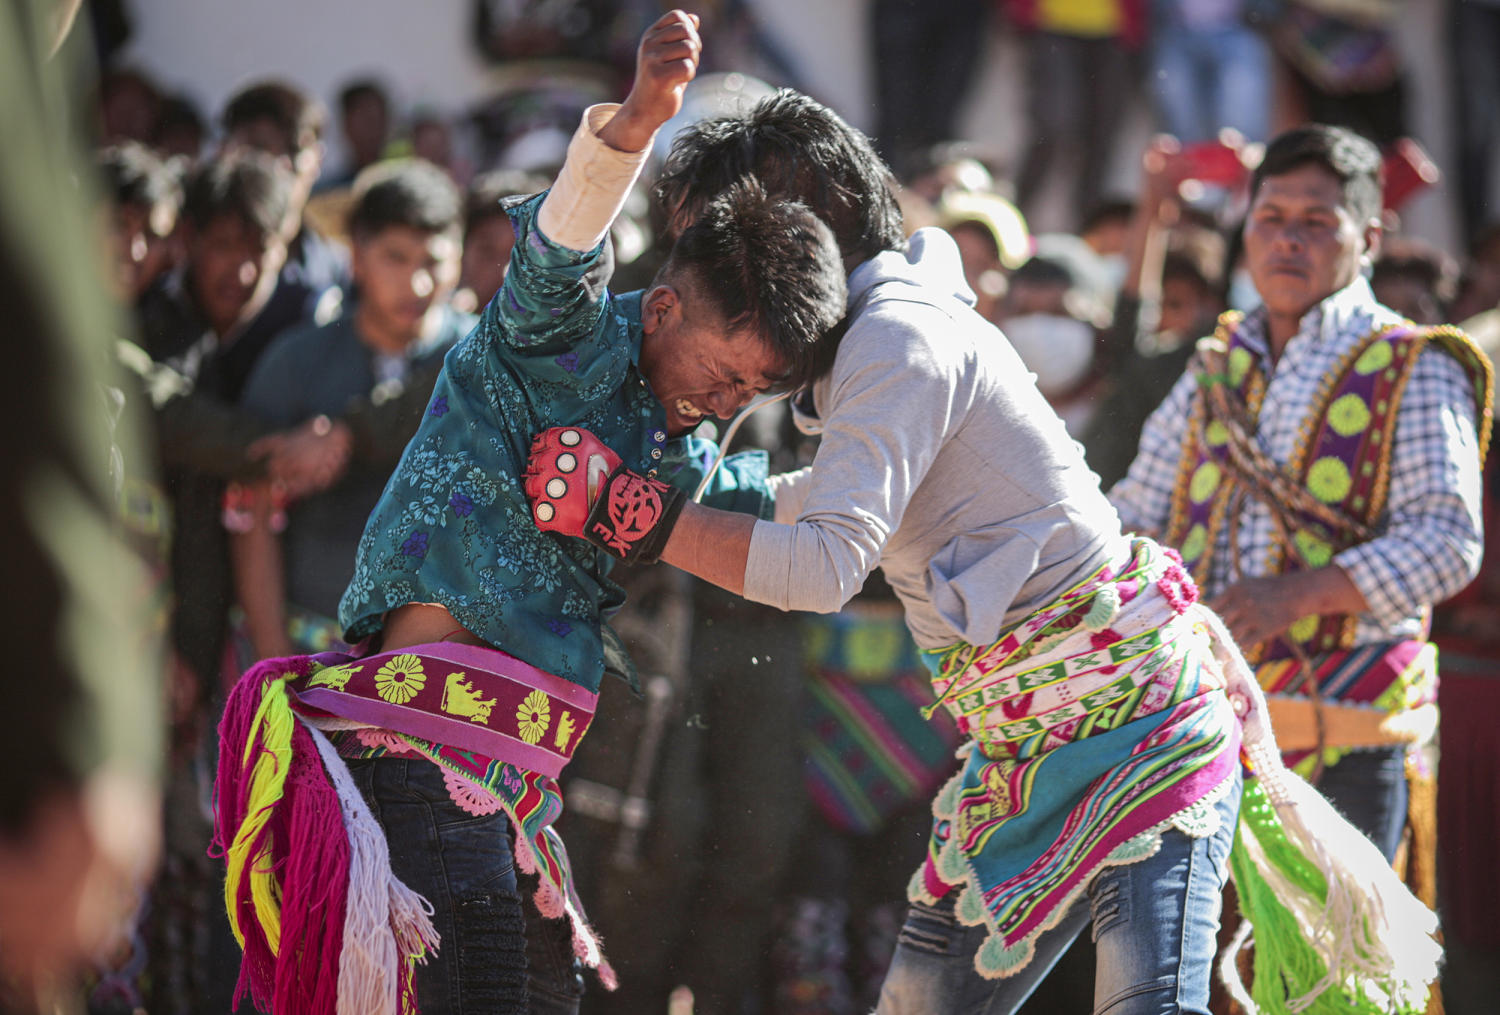 In Bolivia's Andes, Indigenous Quechua settle disputes with ritual dance, hand-to-hand combat